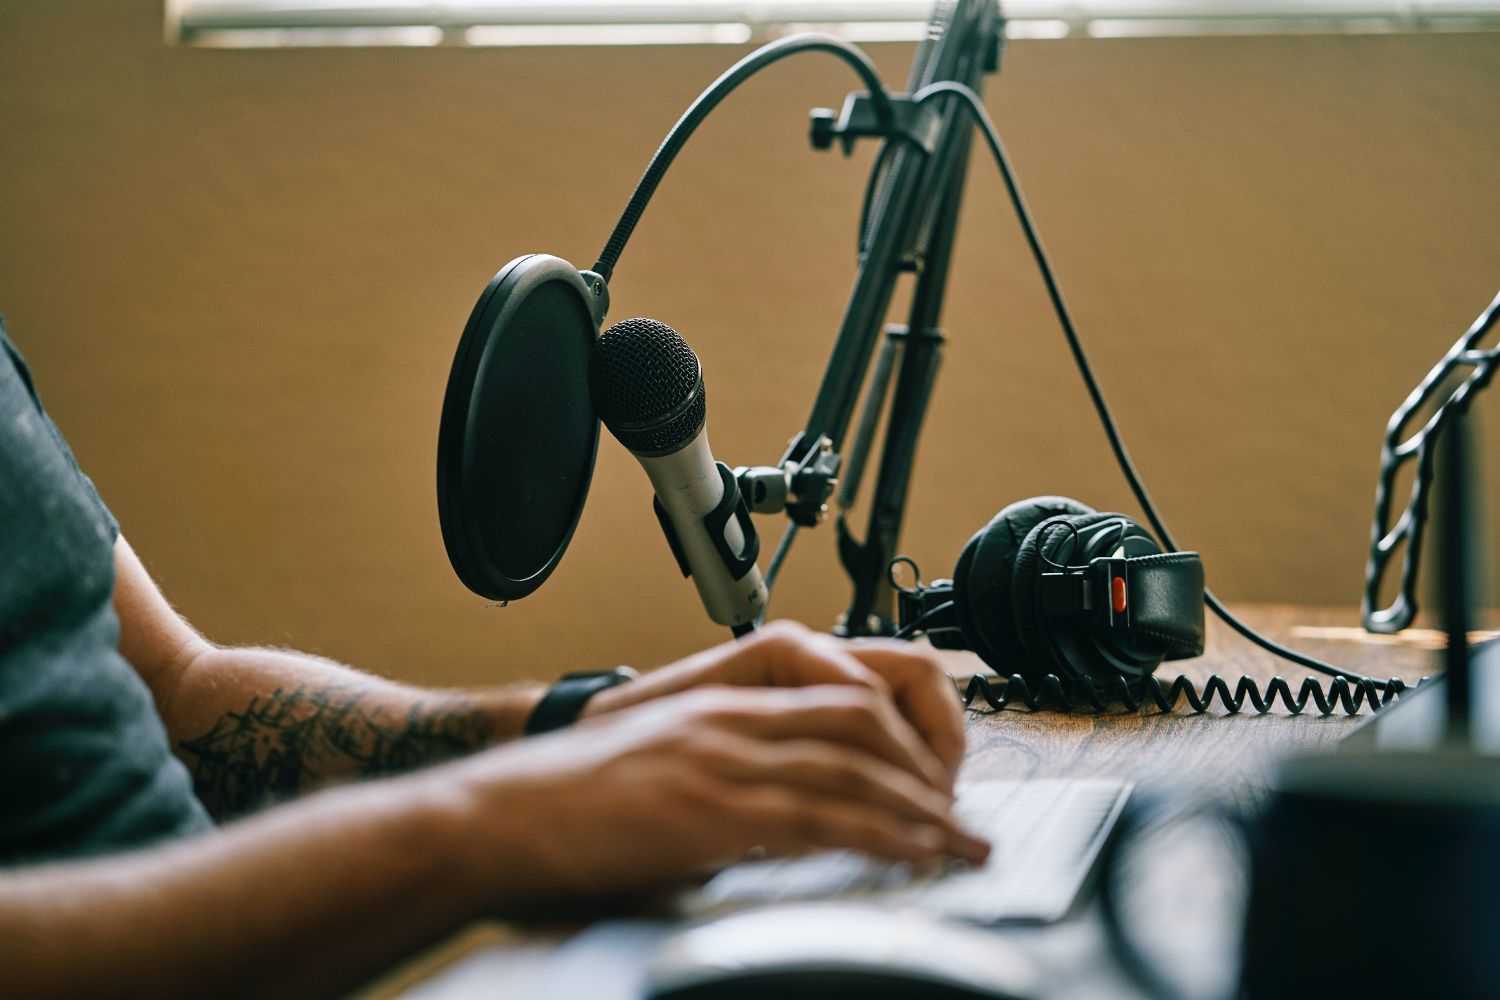 work in studio with microphone Photo by Convertkit on unsplash